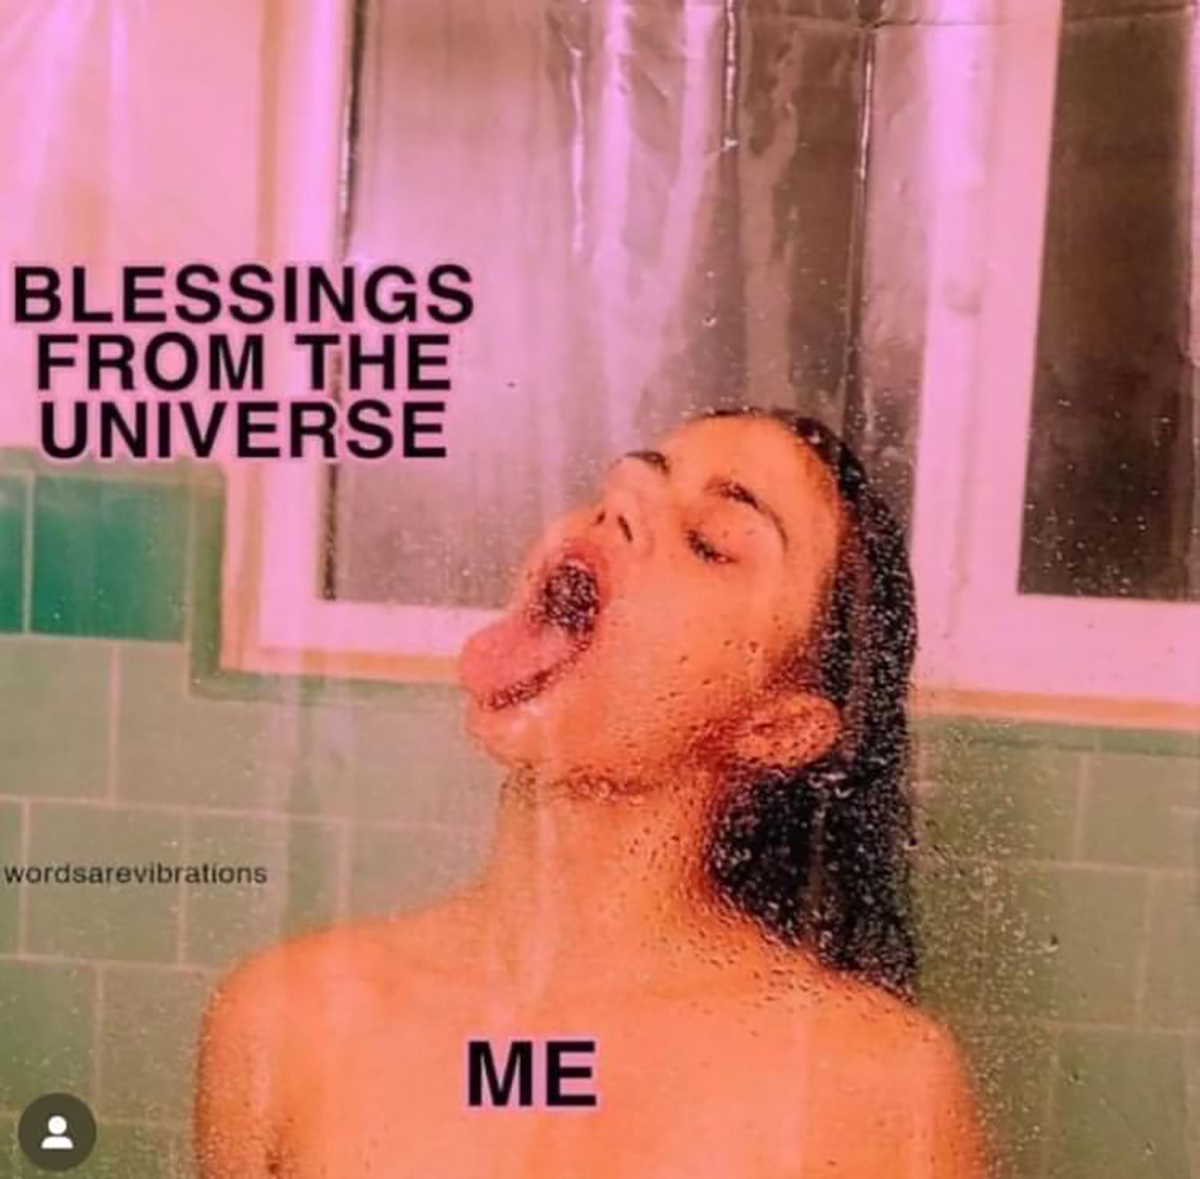 fresh memes - album cover - Blessings From The Universe wordsarevibrations Me